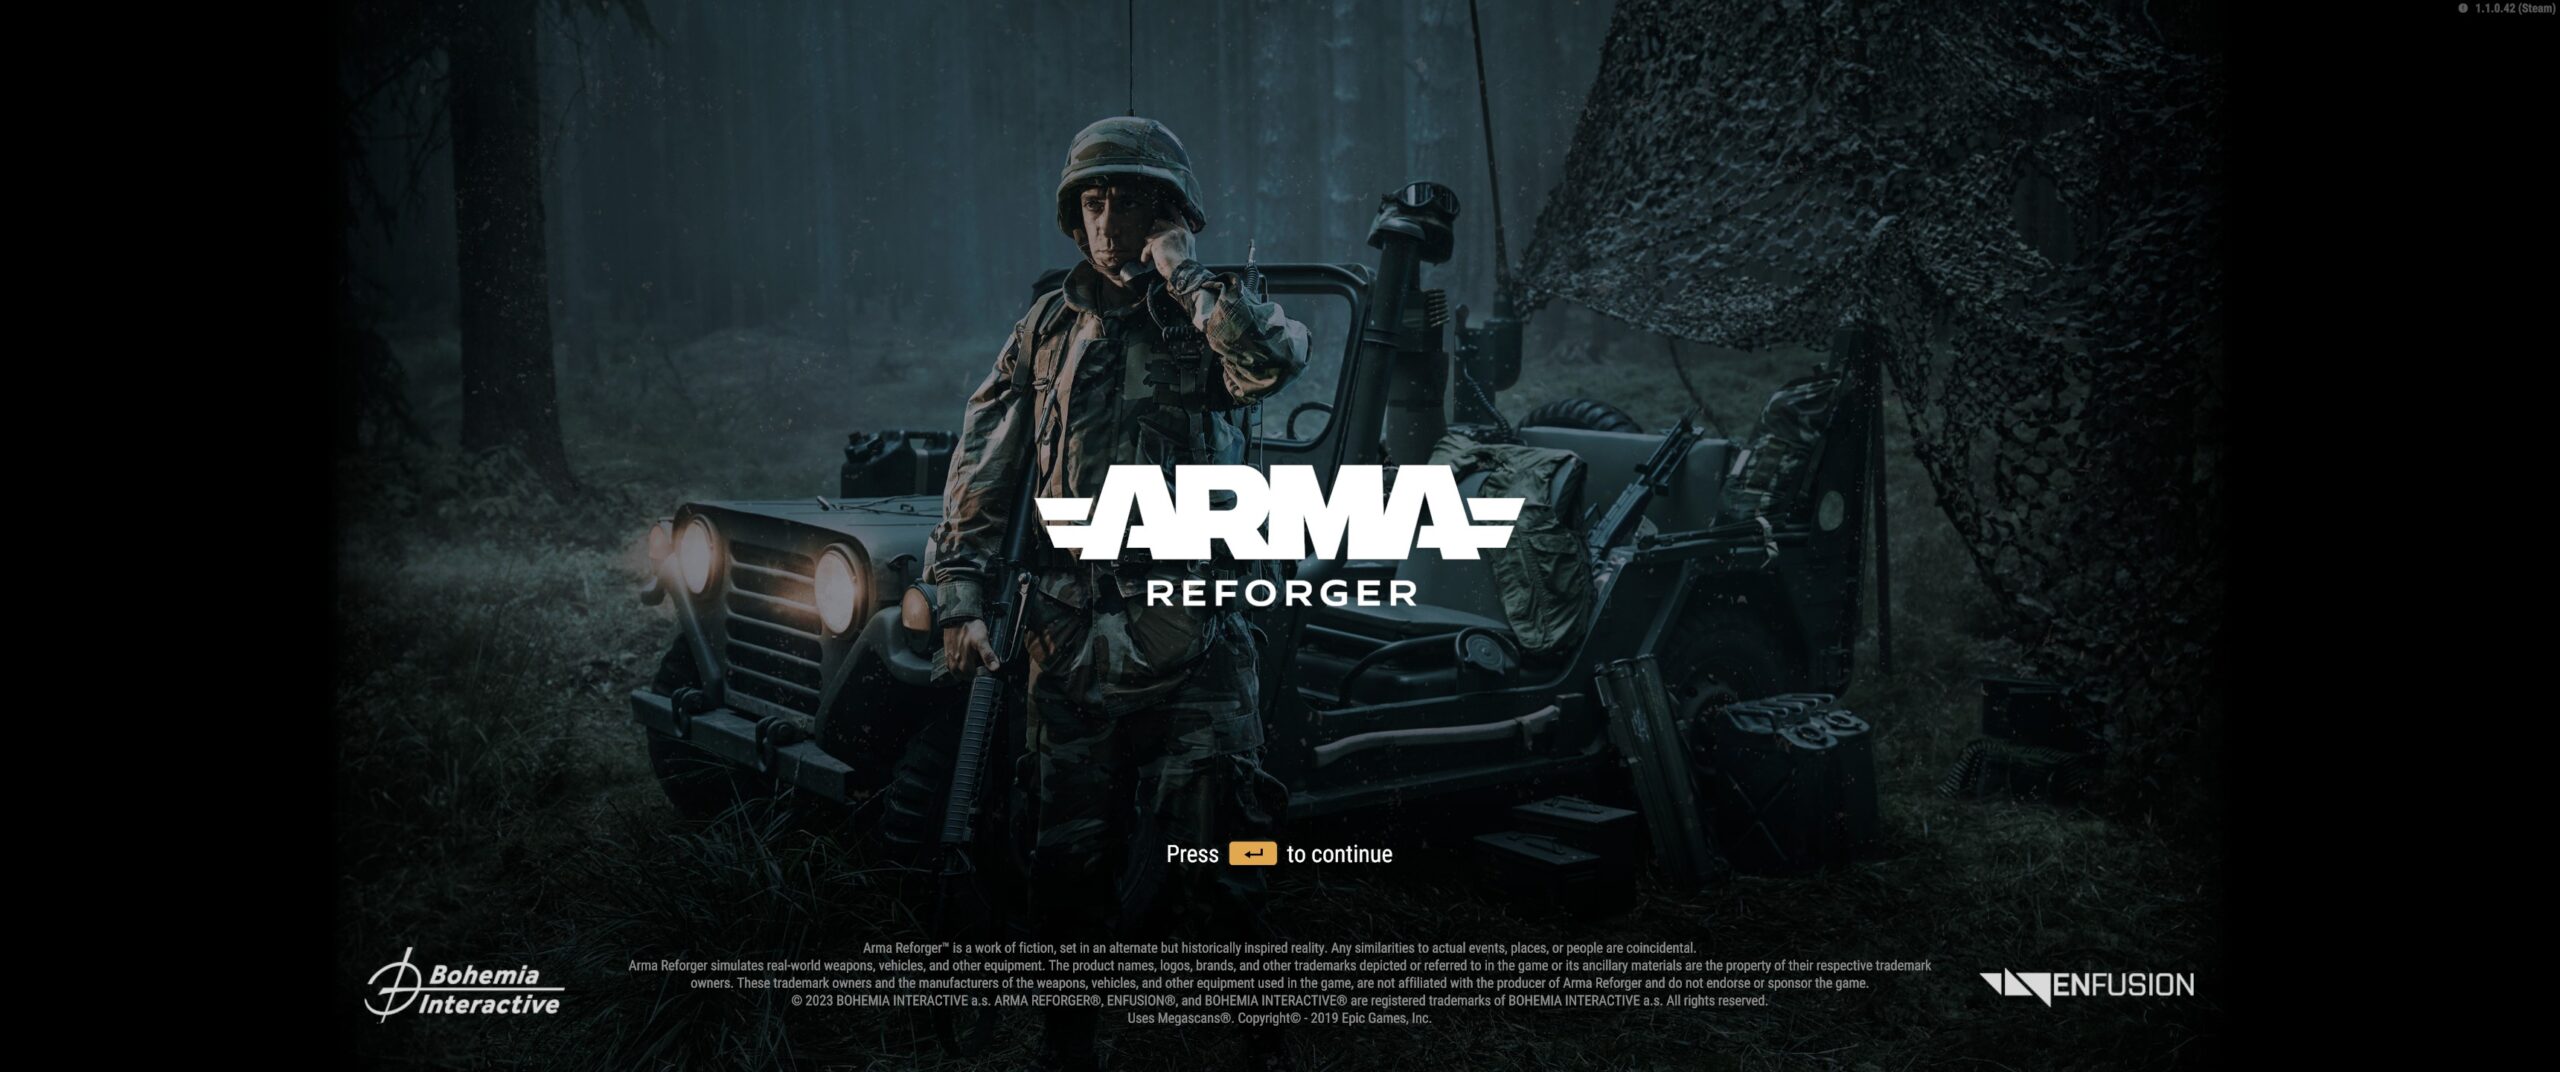 Arma Reforger Loading Screen